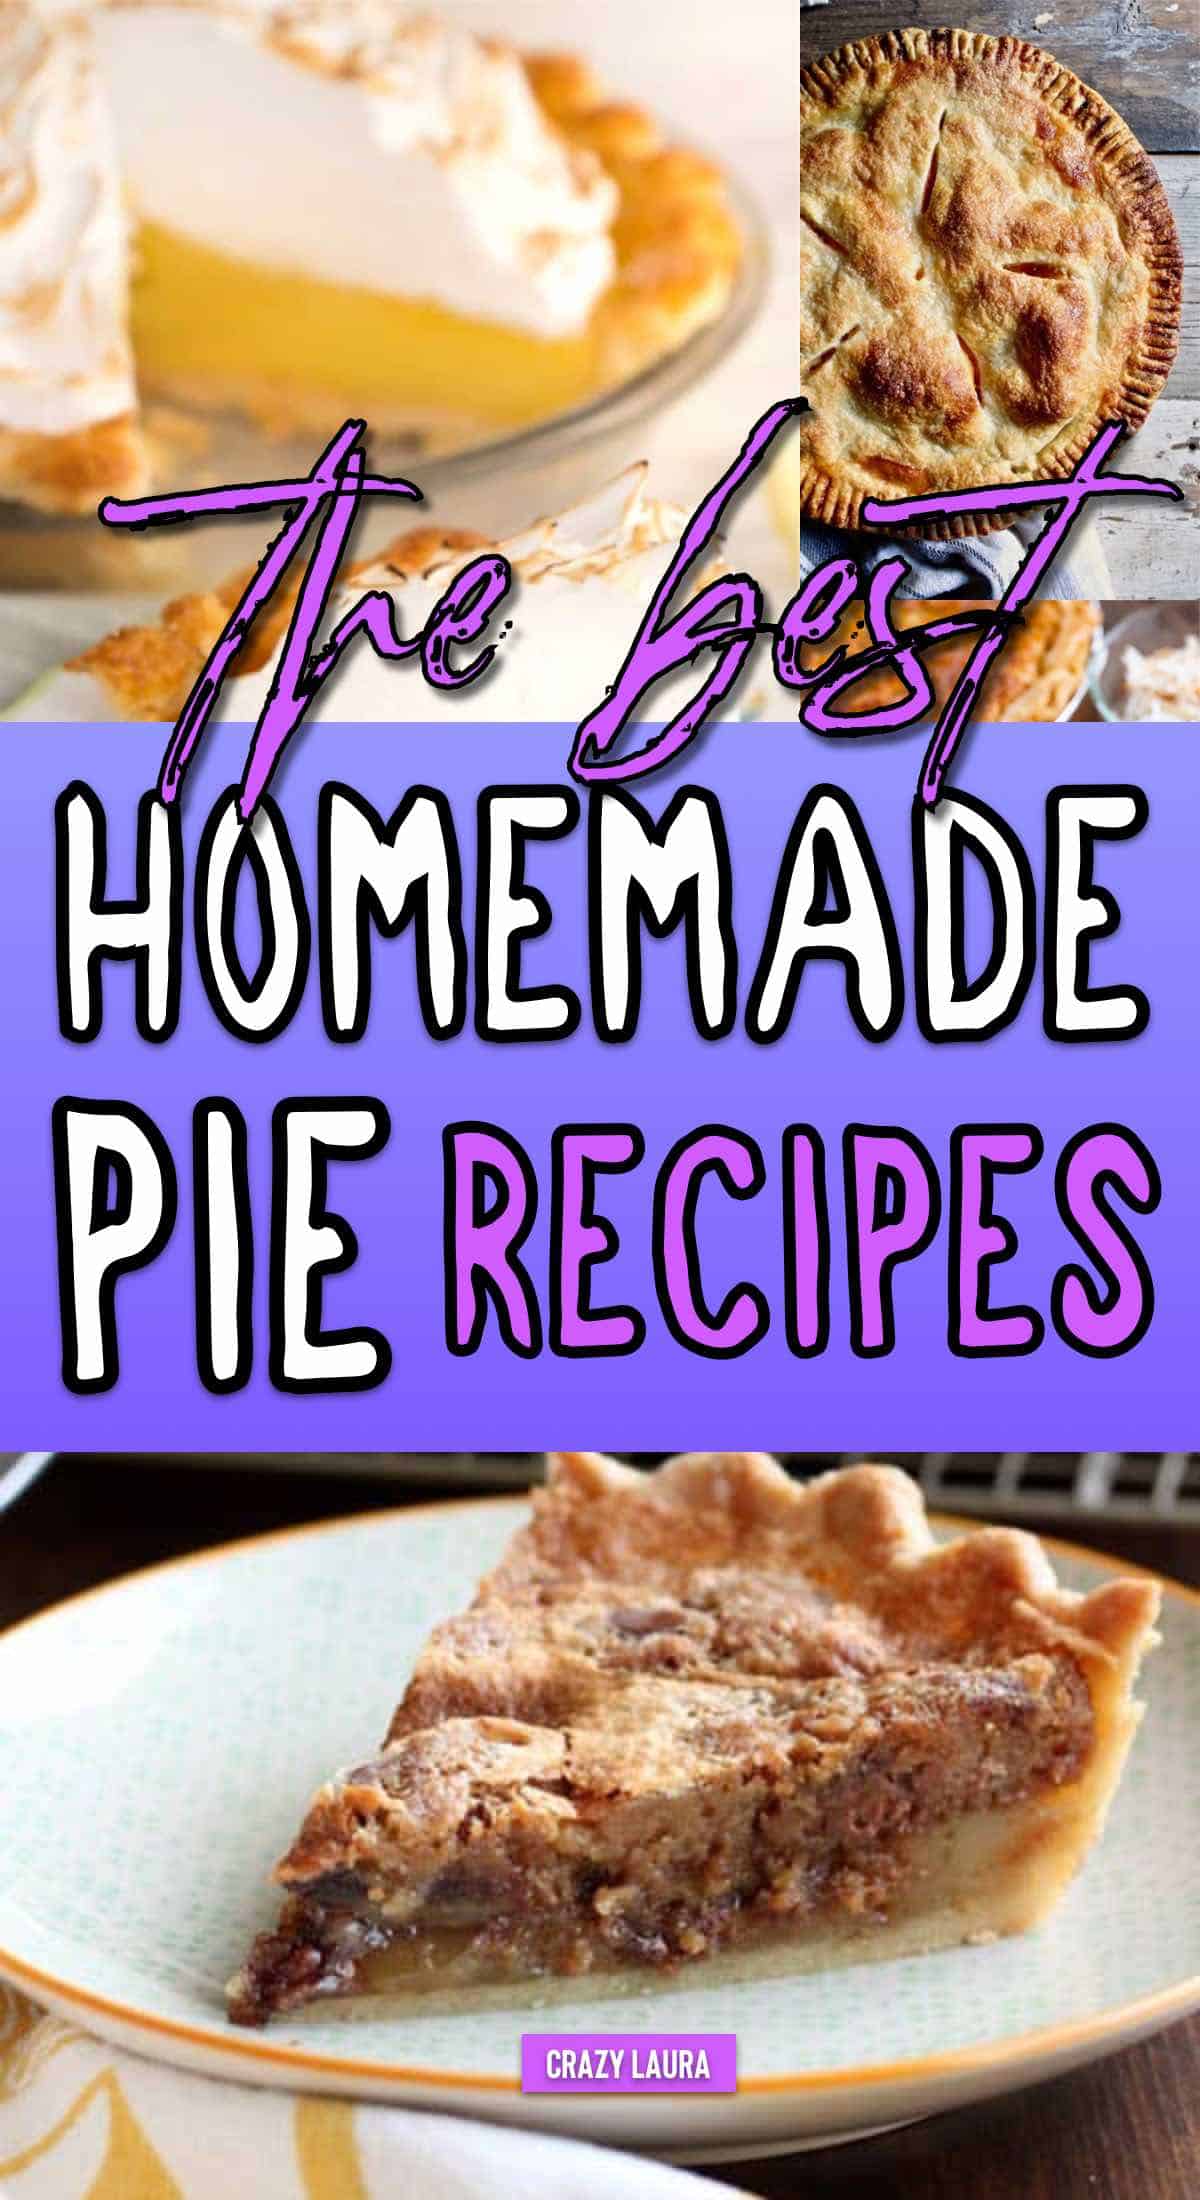 list of pie recipes to try